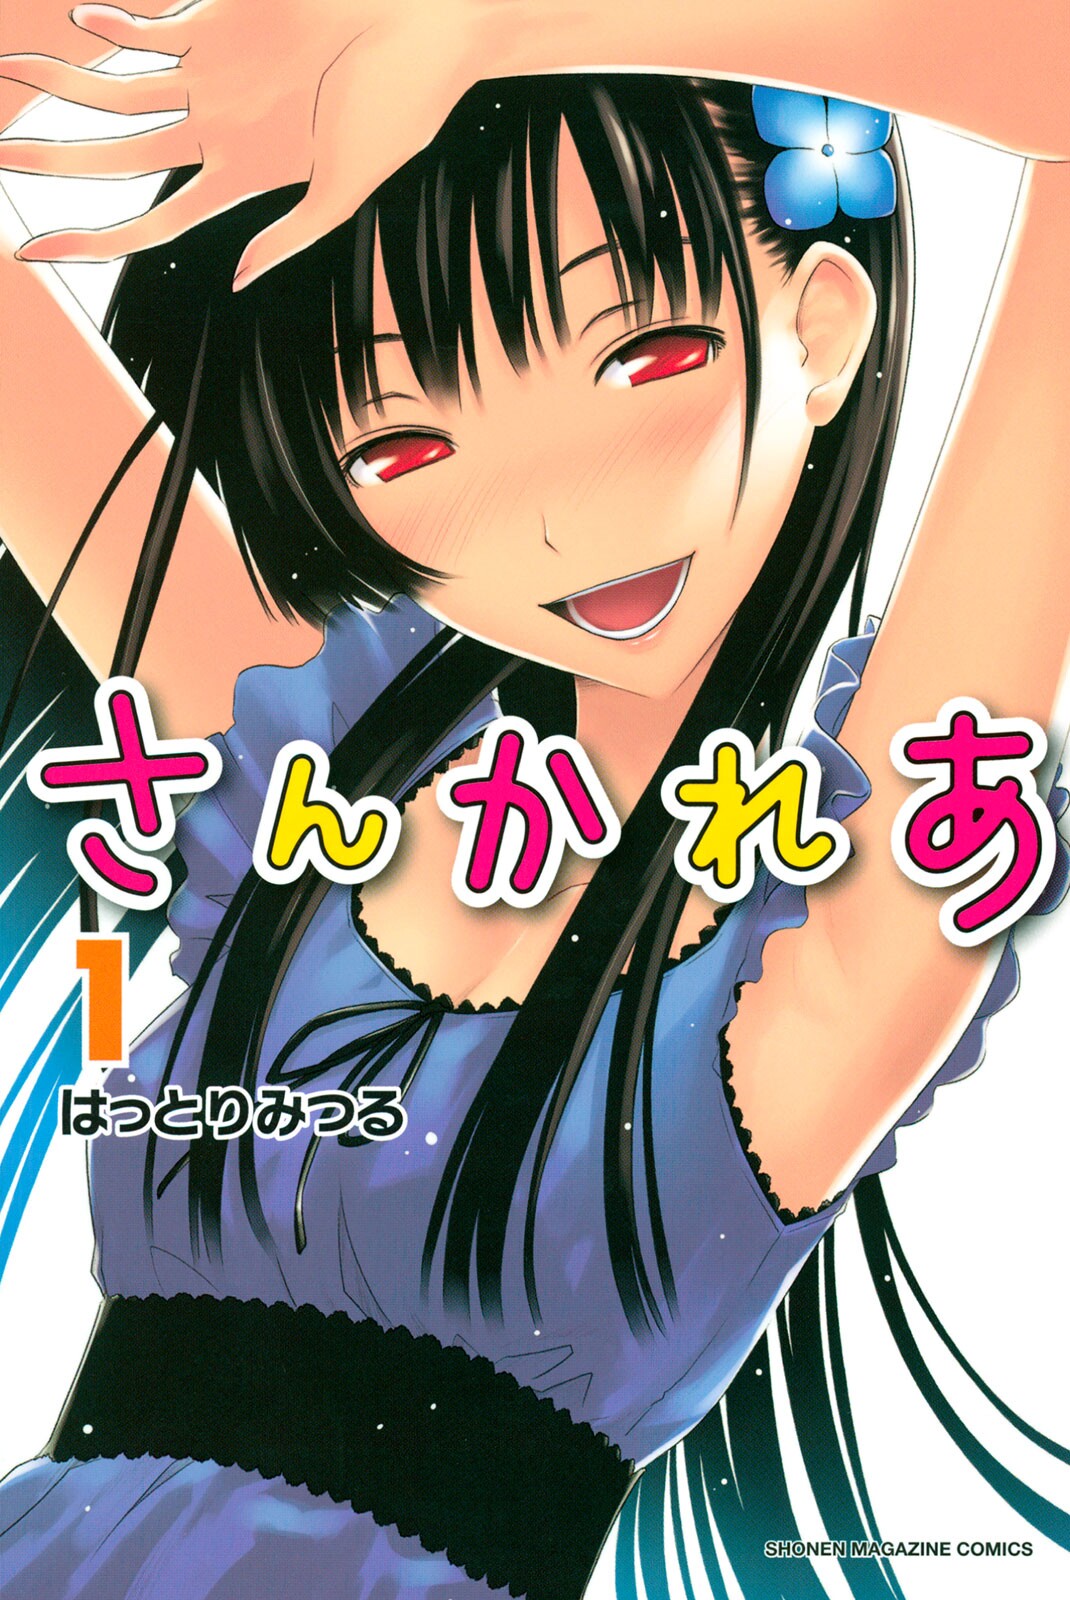 Sankarea: Undying Love (Discussion 7) - Tease of the Dead! - The Otaku  Author